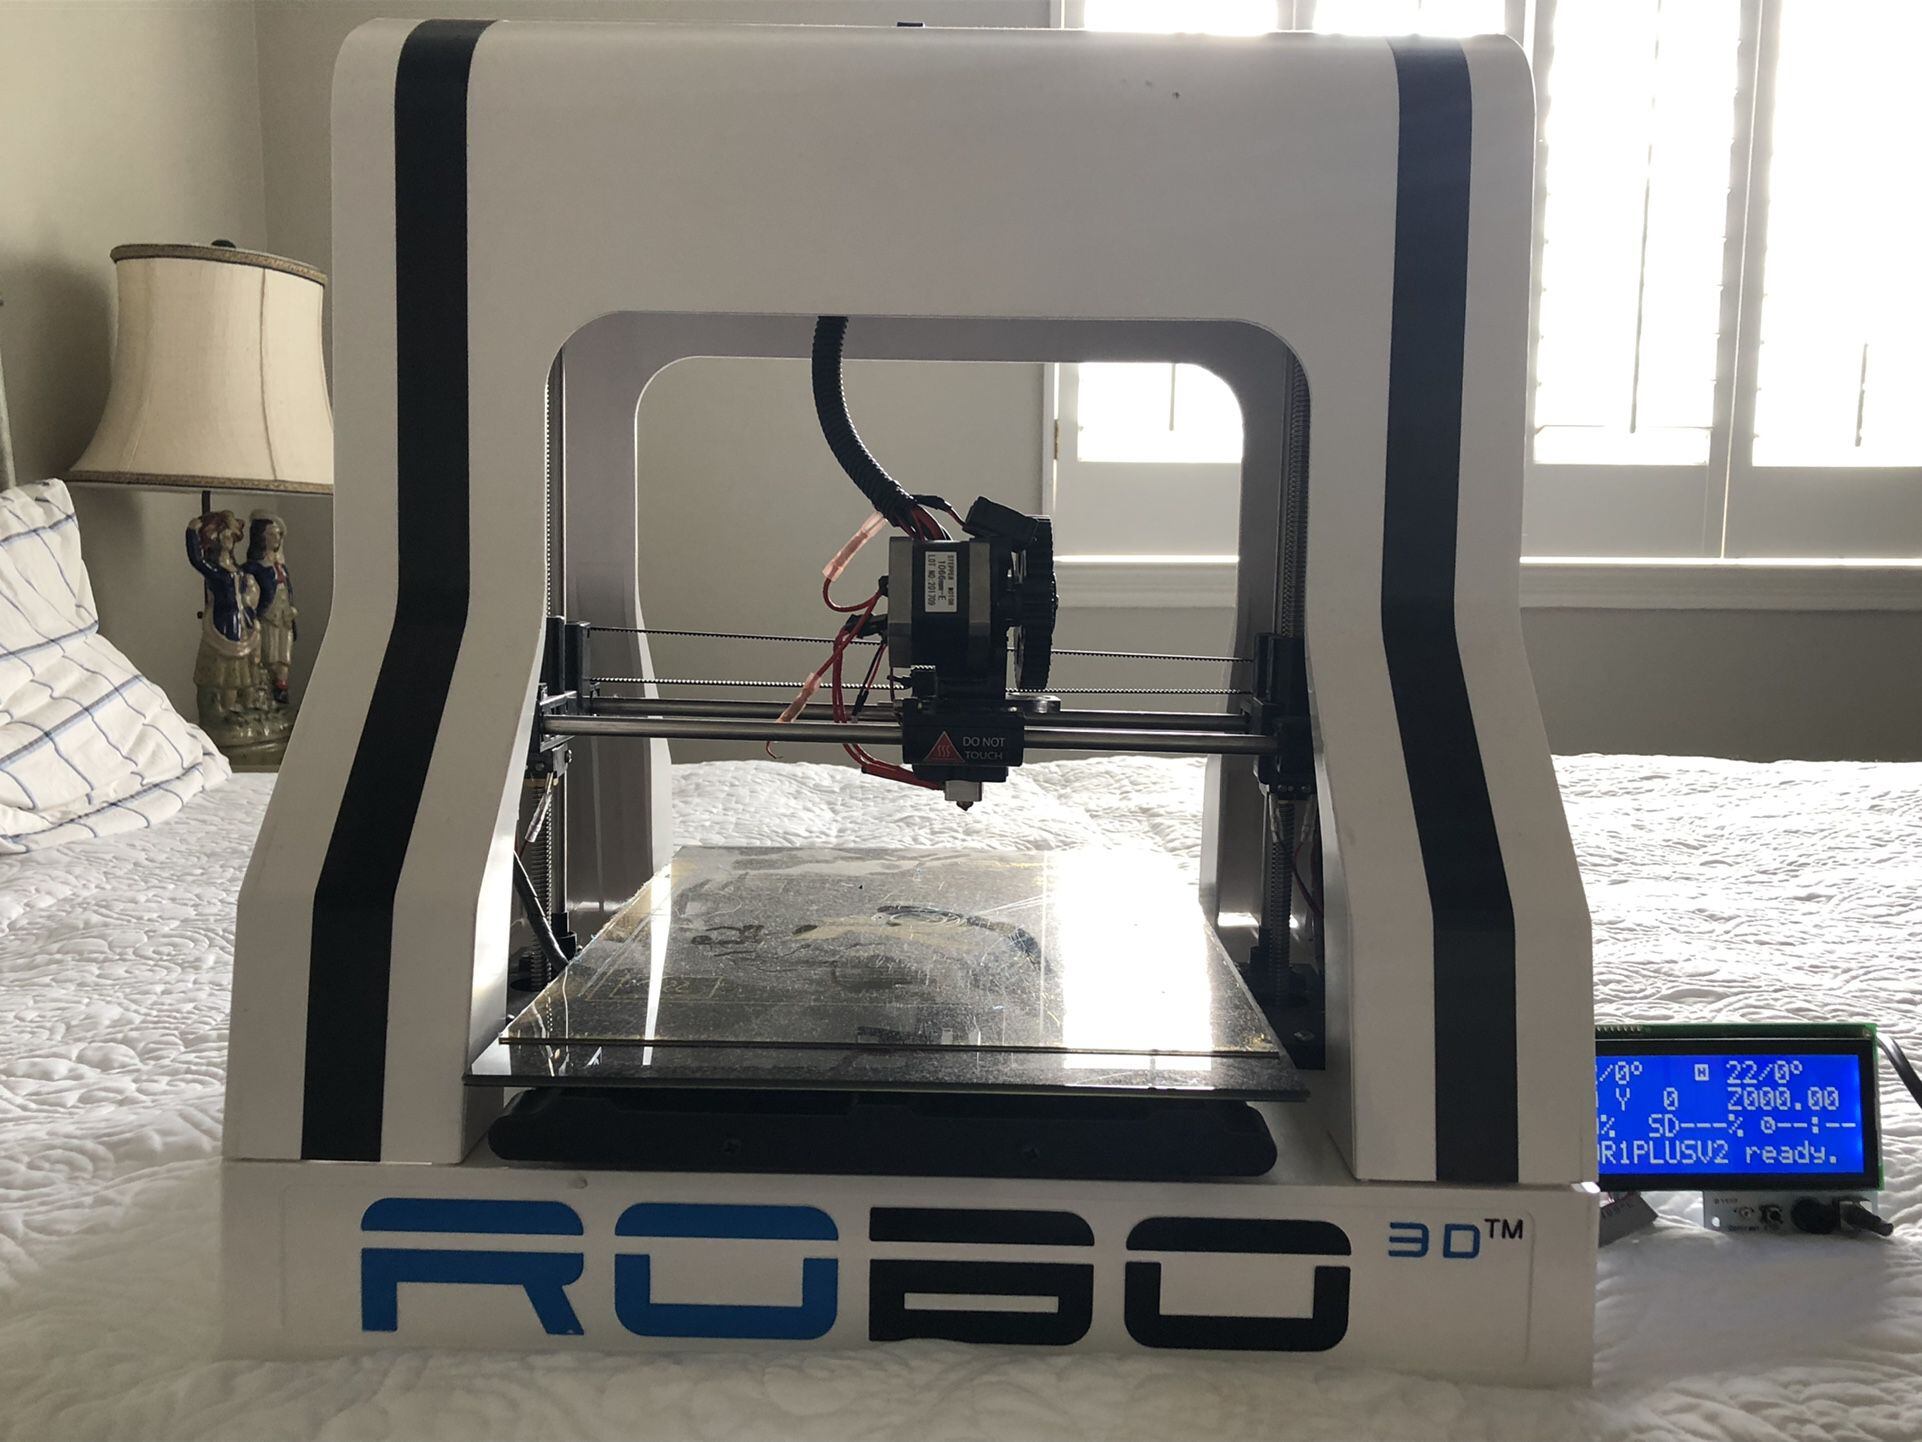 how-to-use-the-sd-card-in-a-robo-personal-3d-printer